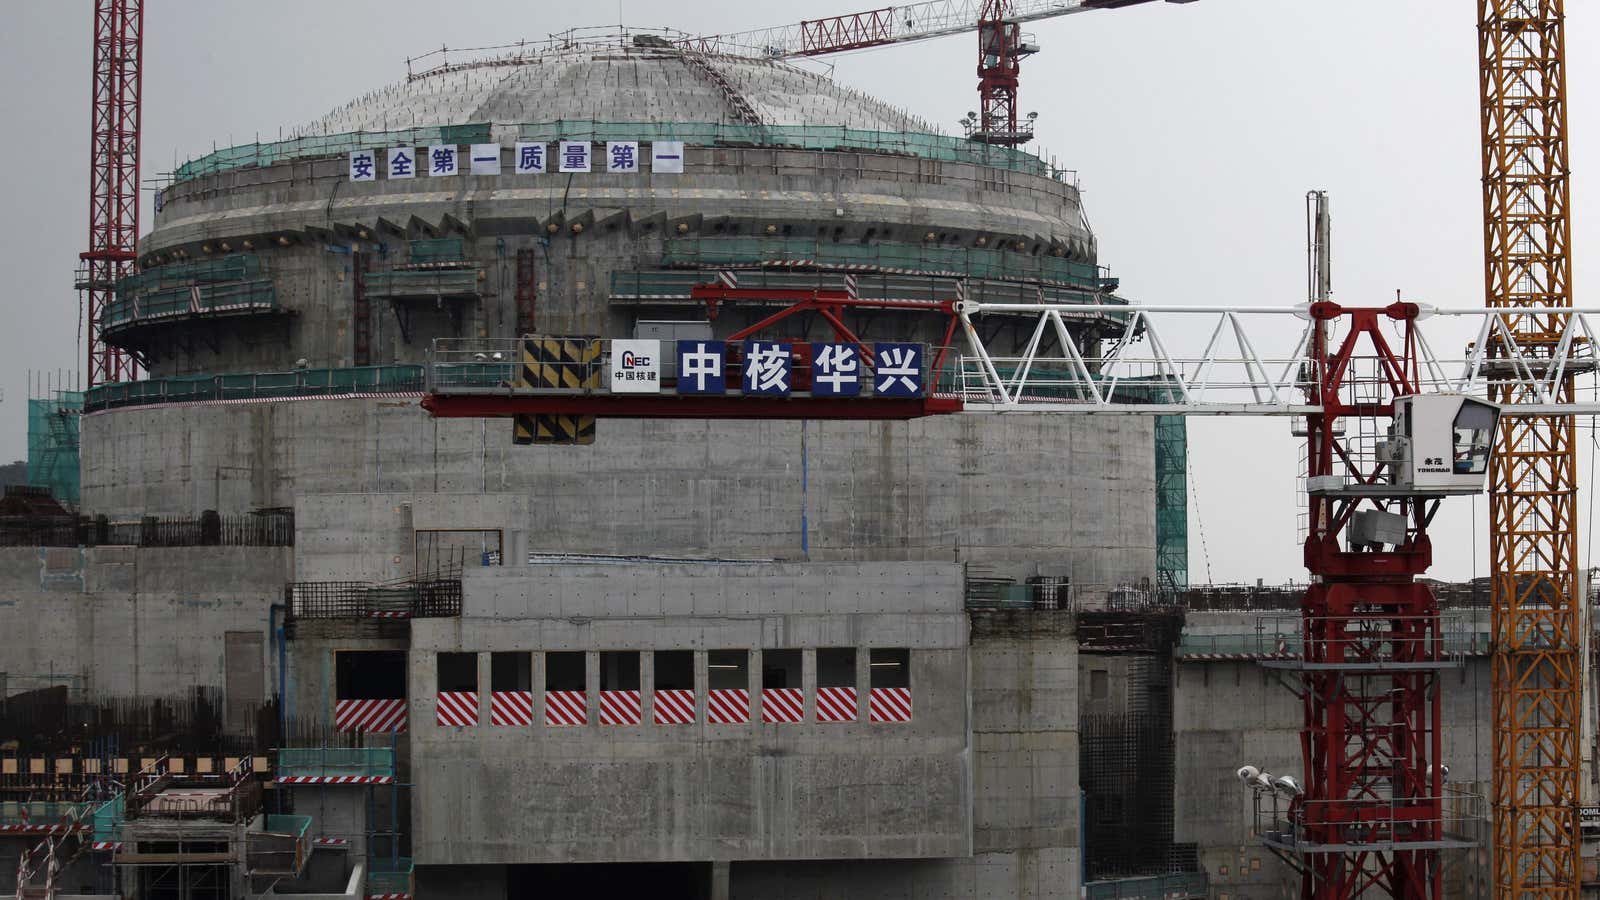 Taishan nuclear power plant, when it was still under construction.